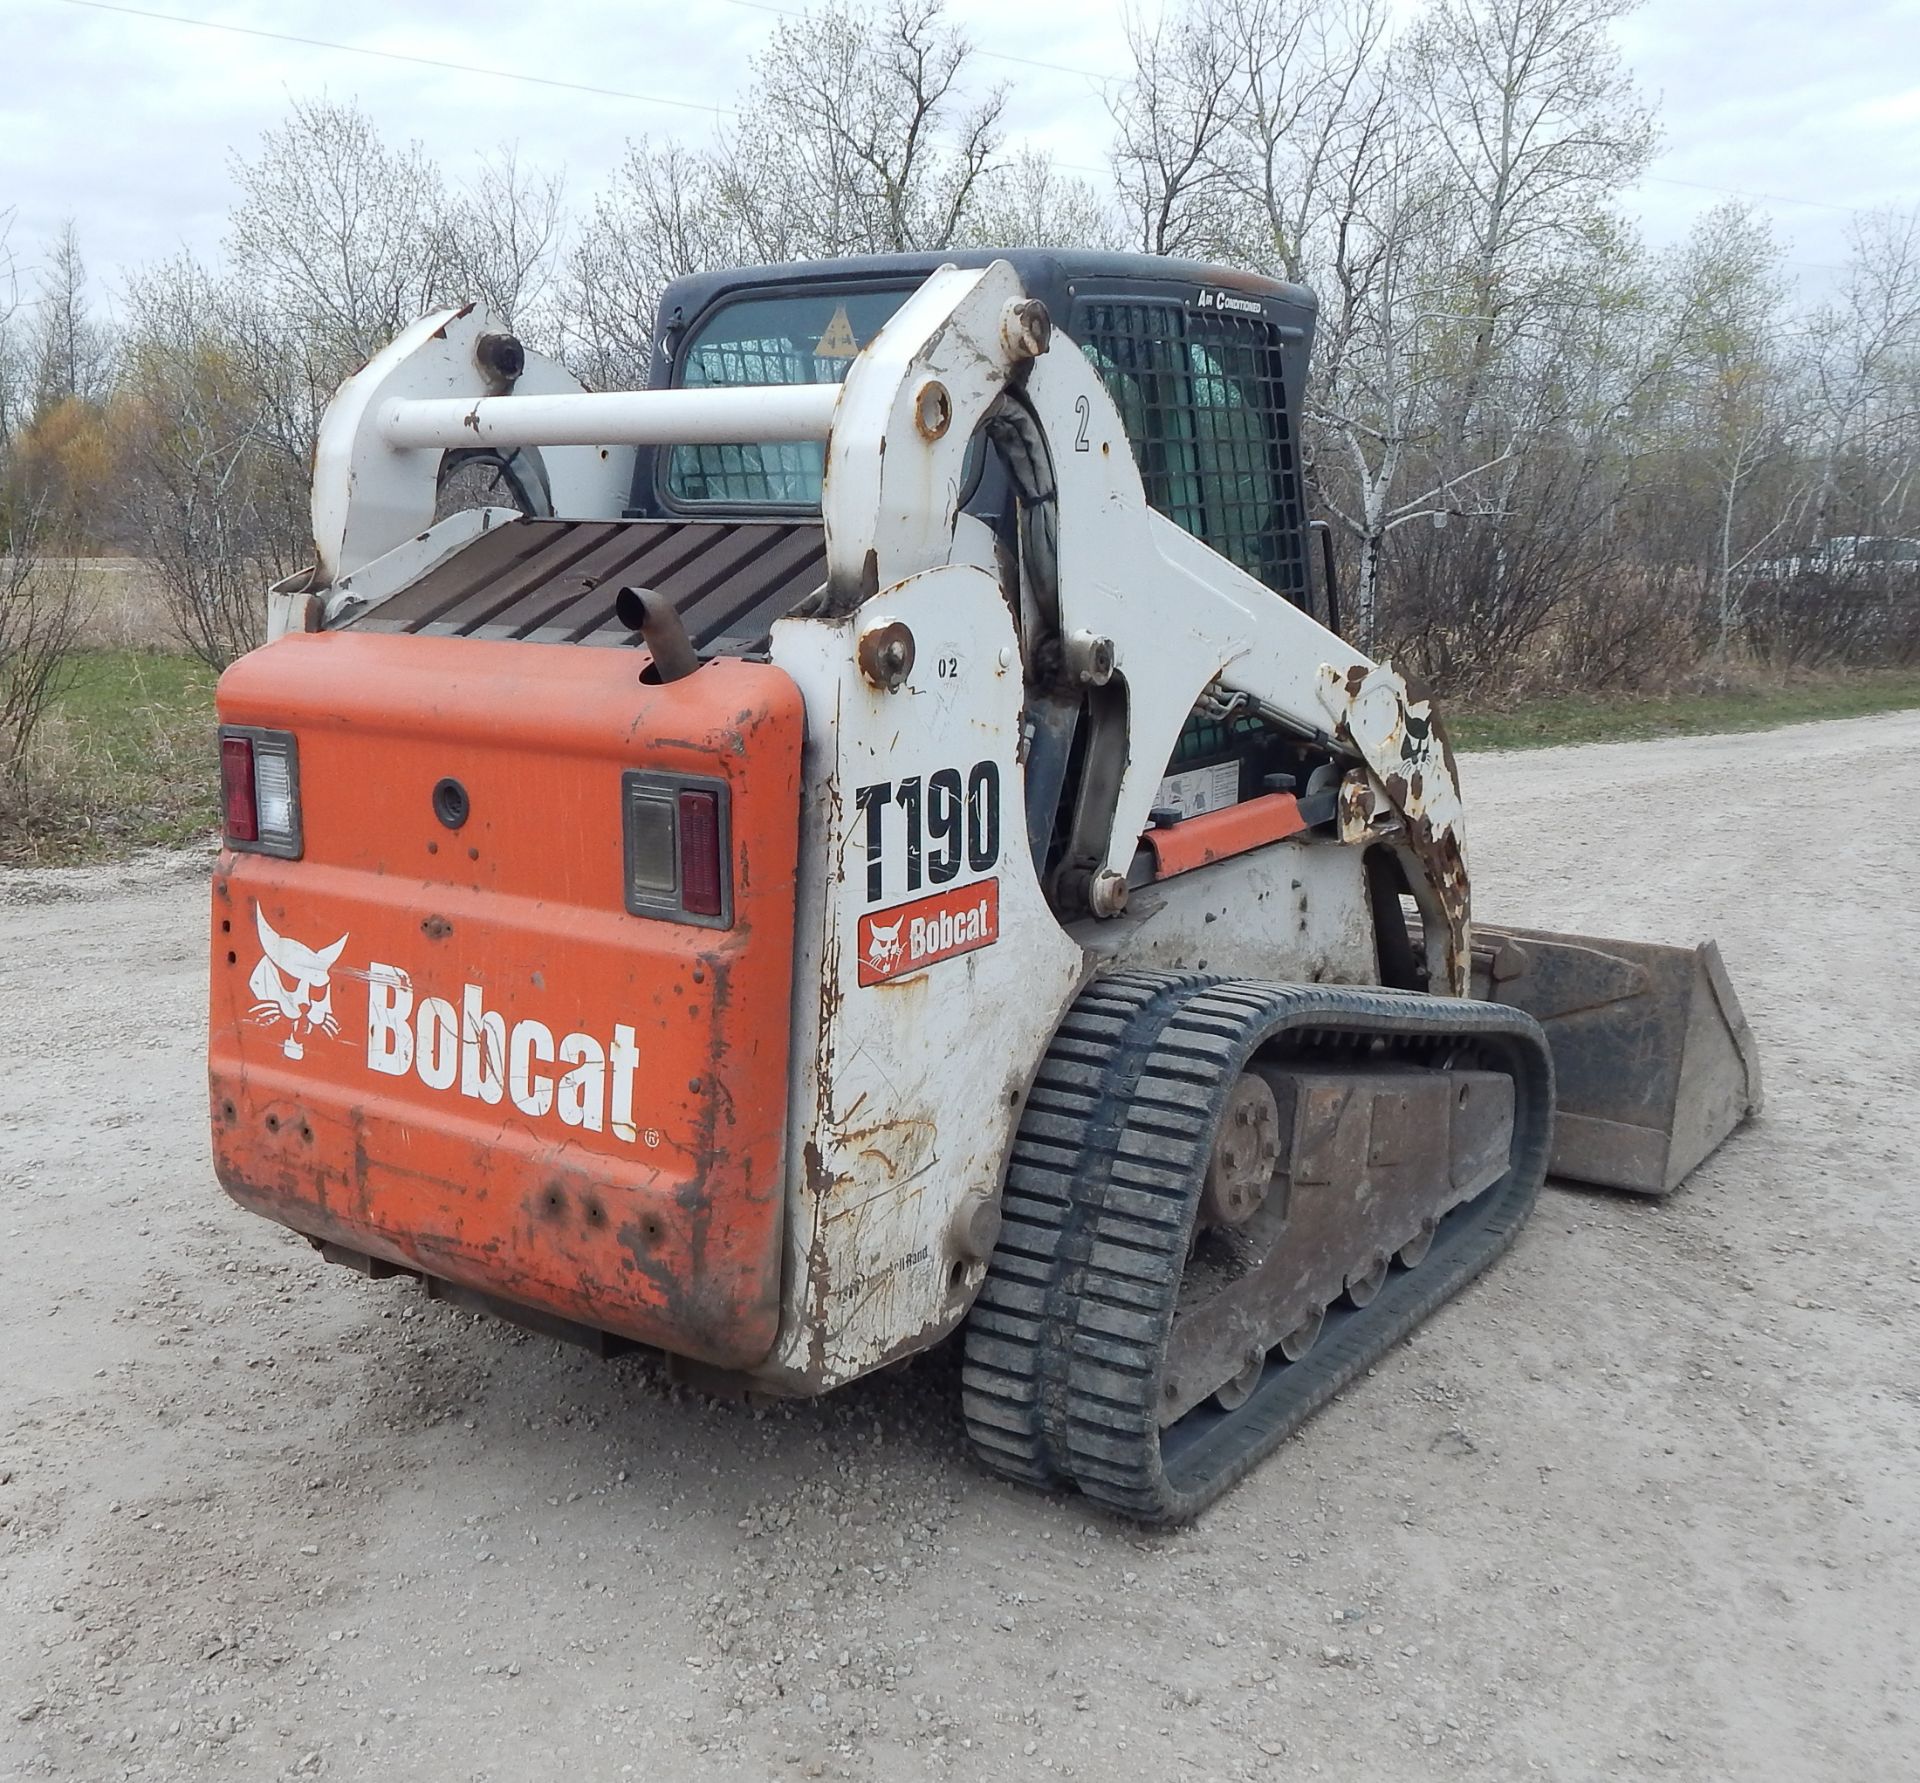 BOBCAT (2006) T190 SKID STEER WITH INLINE 4 TURBO DIESEL ENGINE, 6' SMOOTH BUCKET, RUBBER TRACKS, - Image 3 of 6